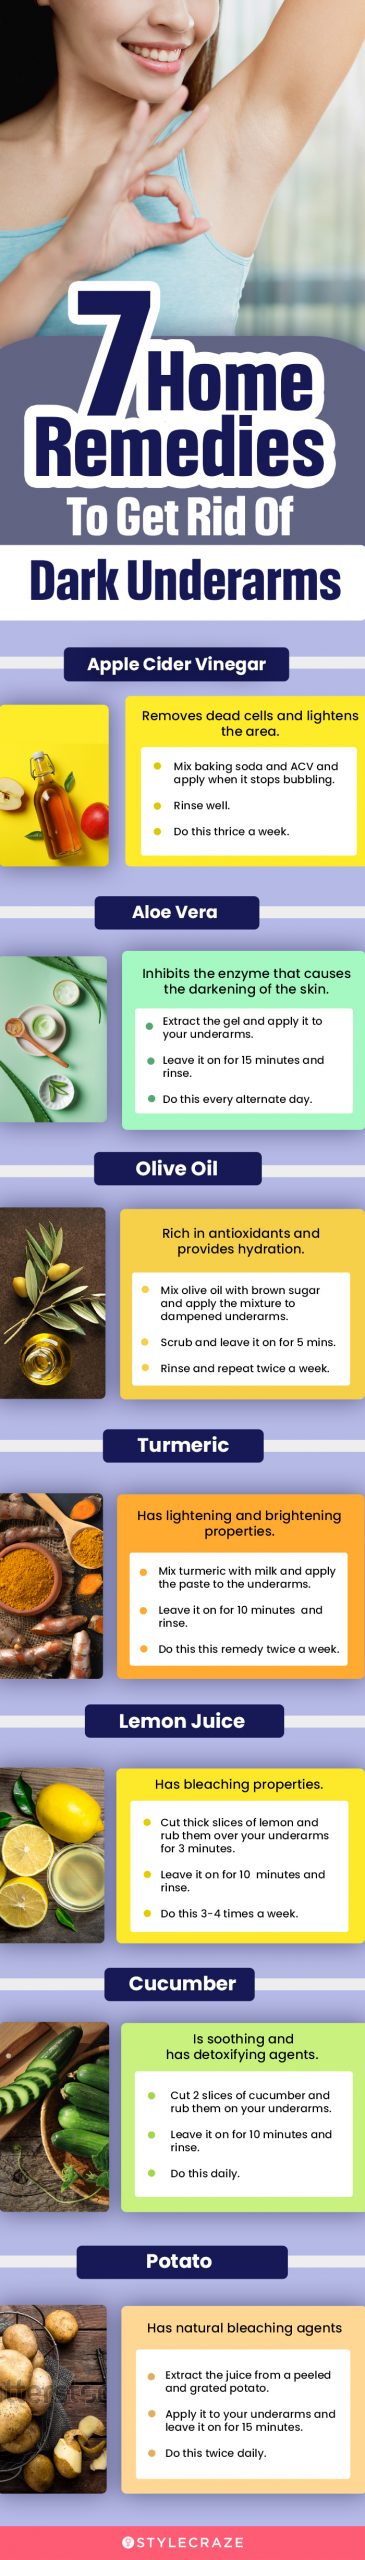 7 home remedies to get rid of dark underarms (infographic)